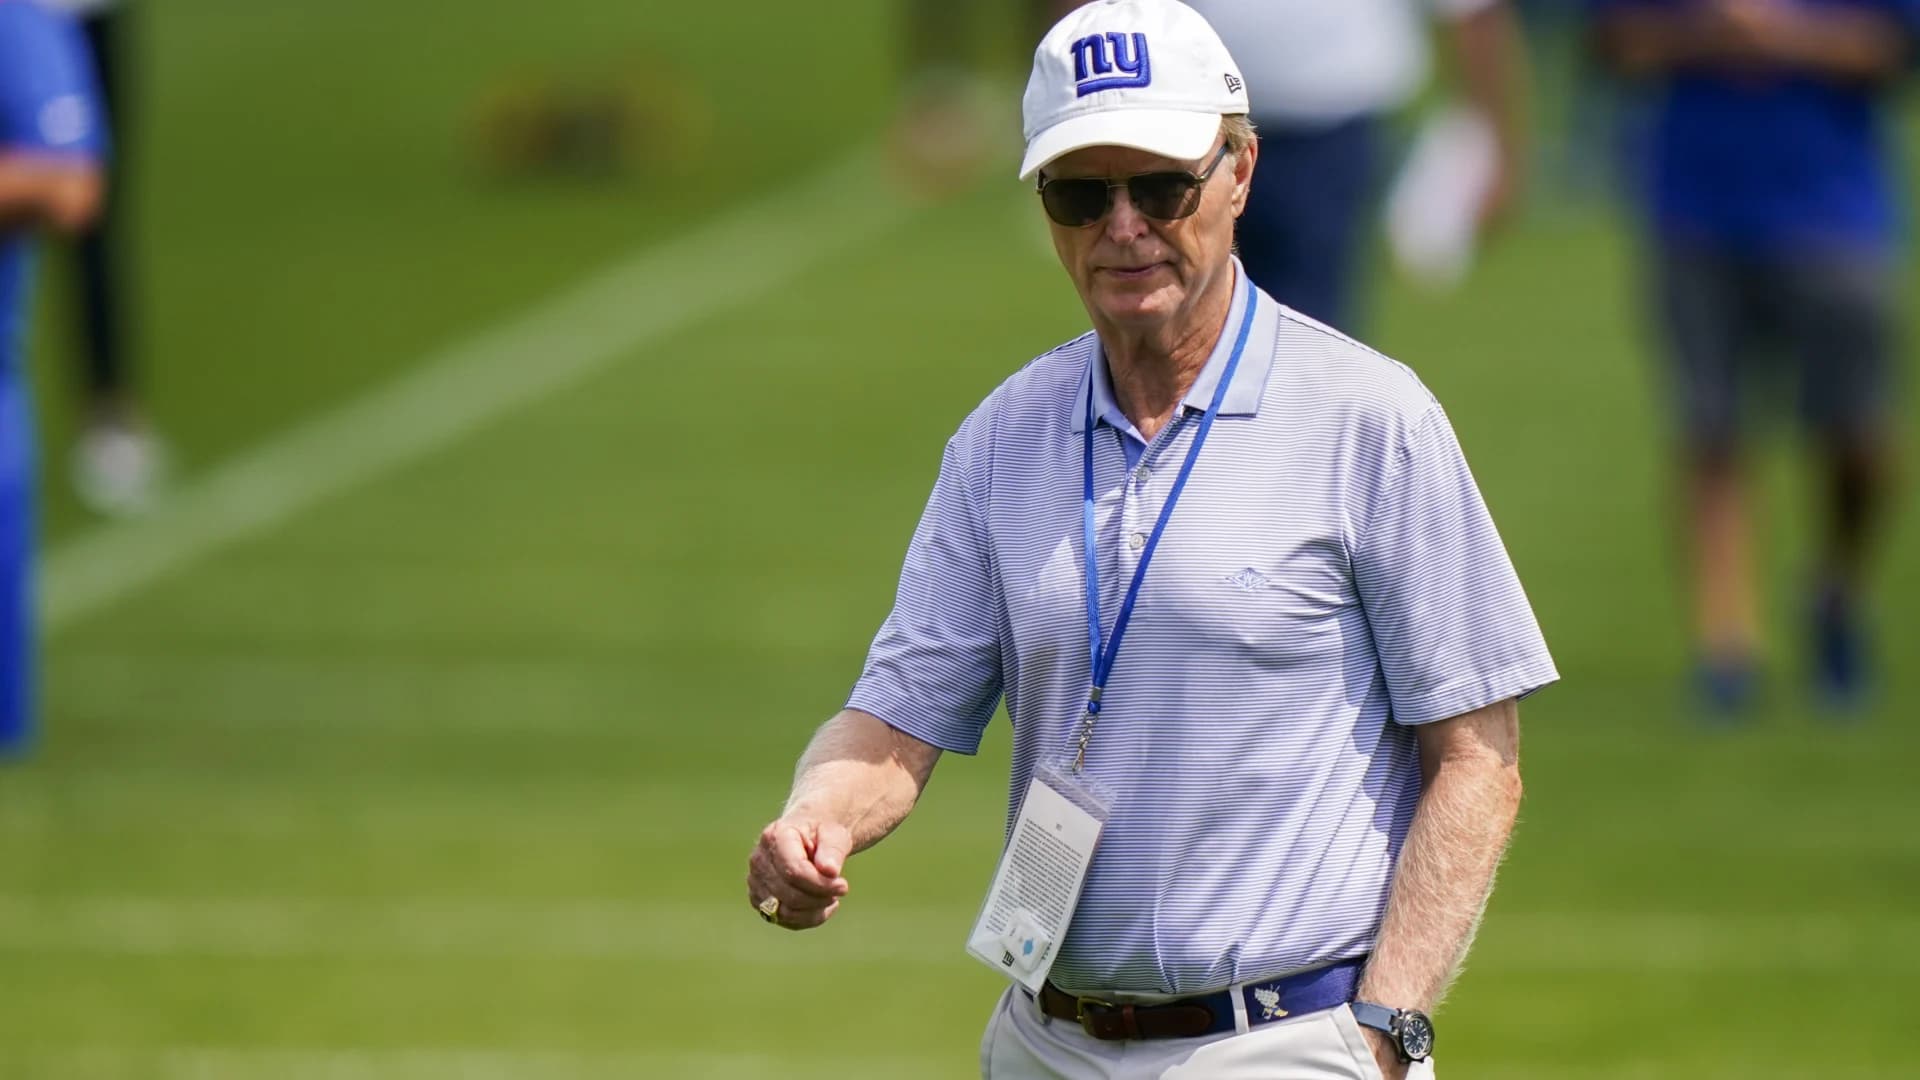 Giants owner John Mara says everyone is on the hot seat